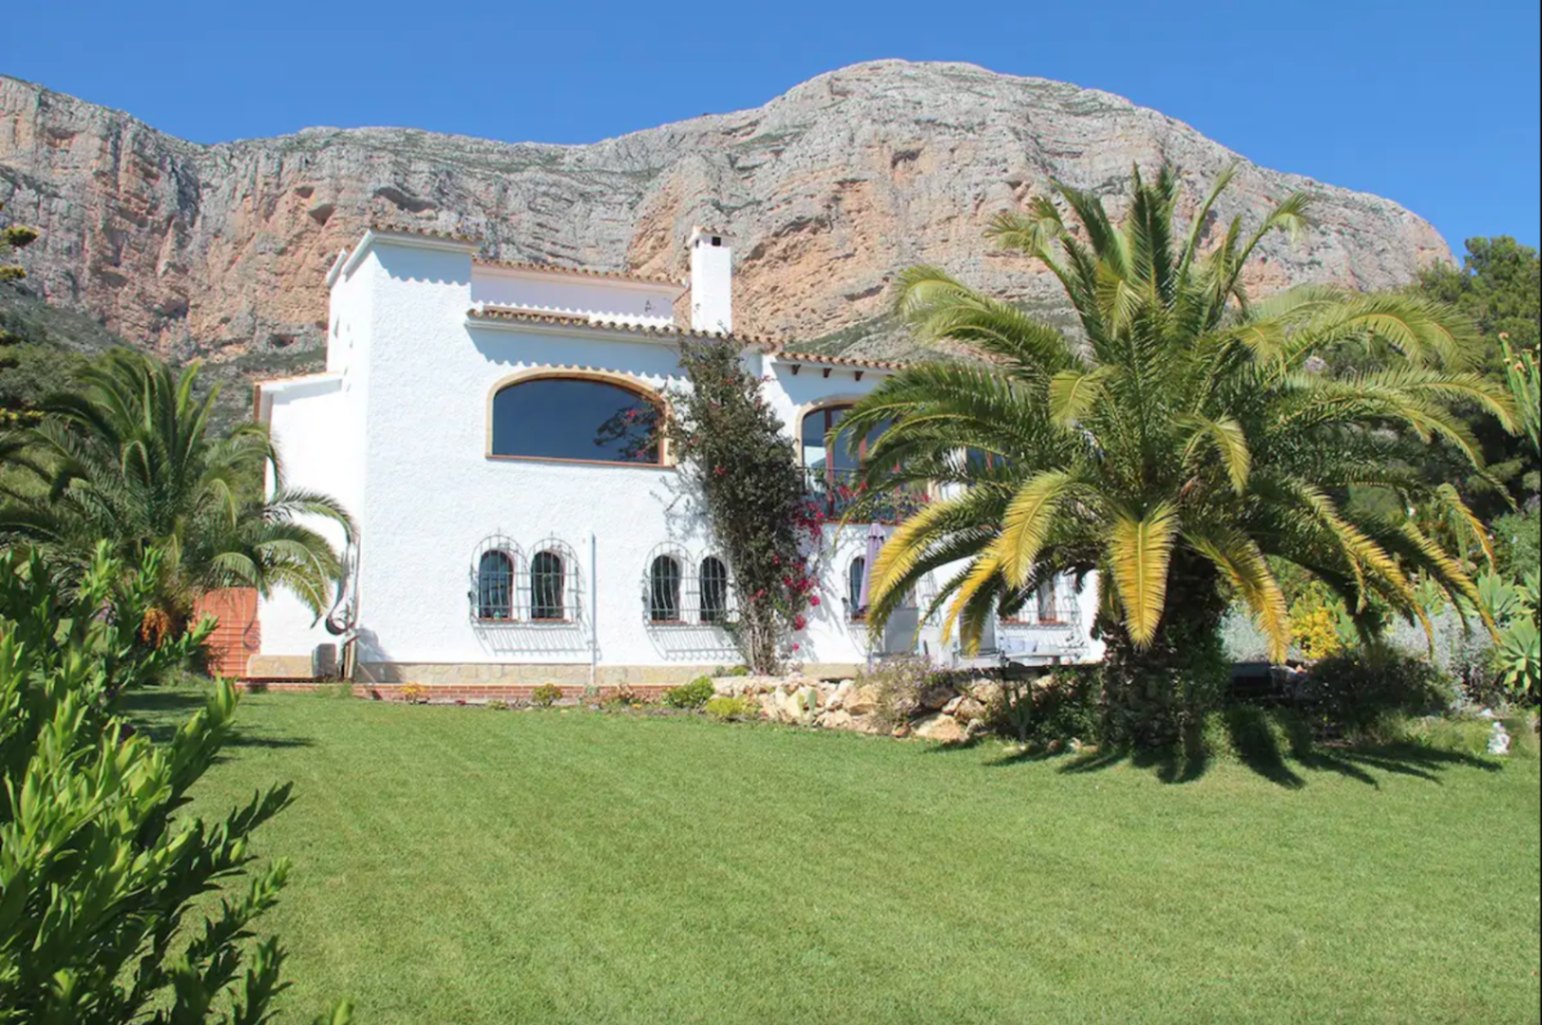 SPACIOUS, PRIVATE VILLA WITH BEAUTIFUL VIEWS ON THE MONTGO